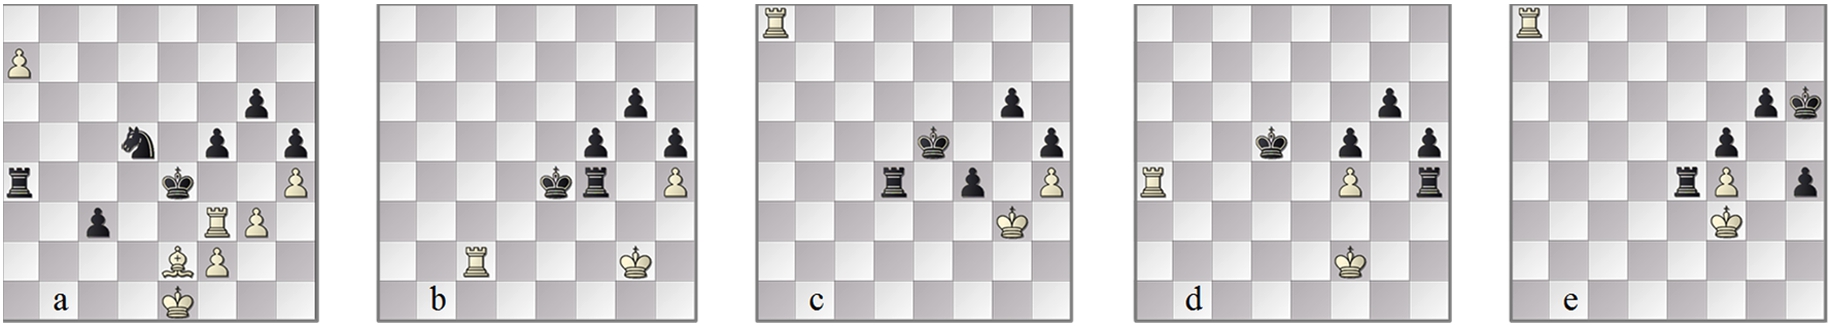 Navrotescu–Shah: as played (a) 56w and (b) 65w, hypothetically leading with SF± to (c) 103w after f4; the easier win (d) 66w after Rxh4 leading with SF± to (e) 75w after h4.